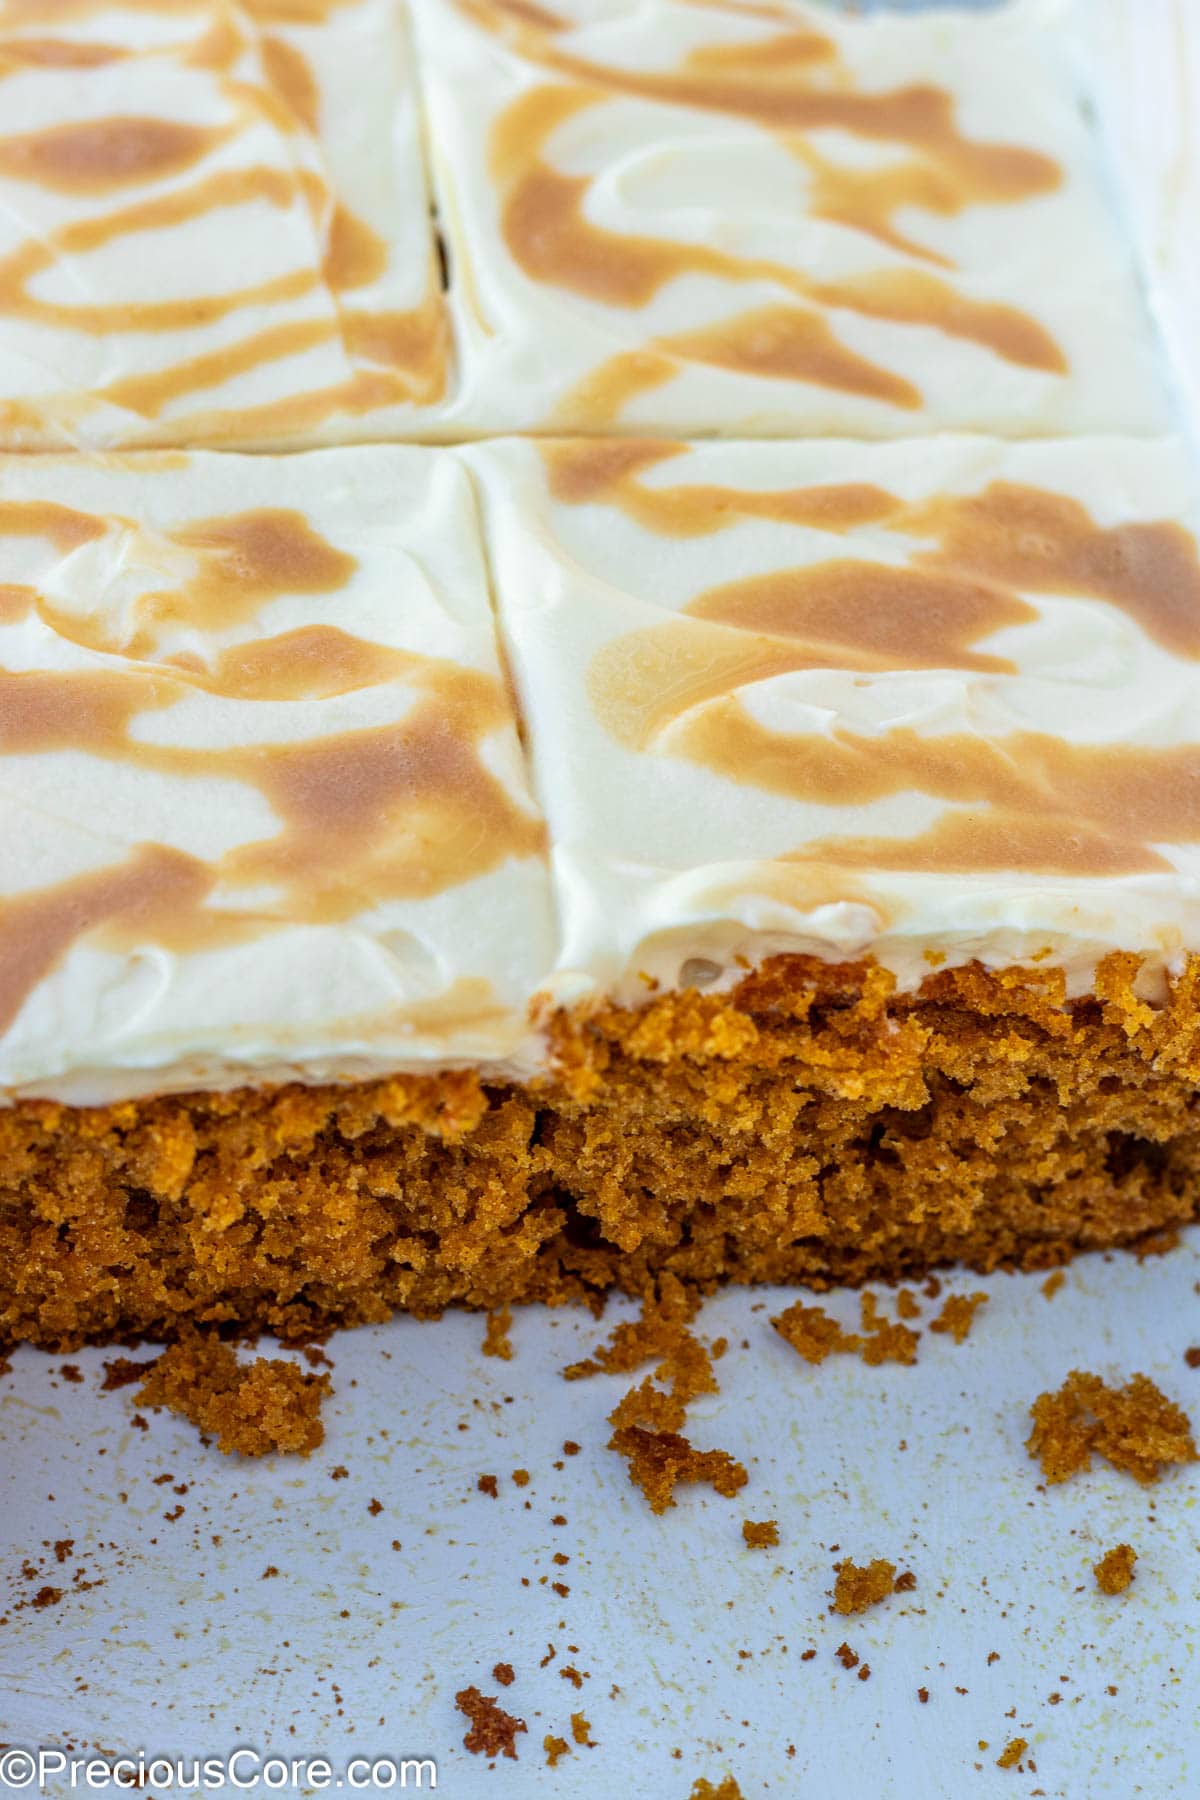 Slices cut out of pumpkin cake.